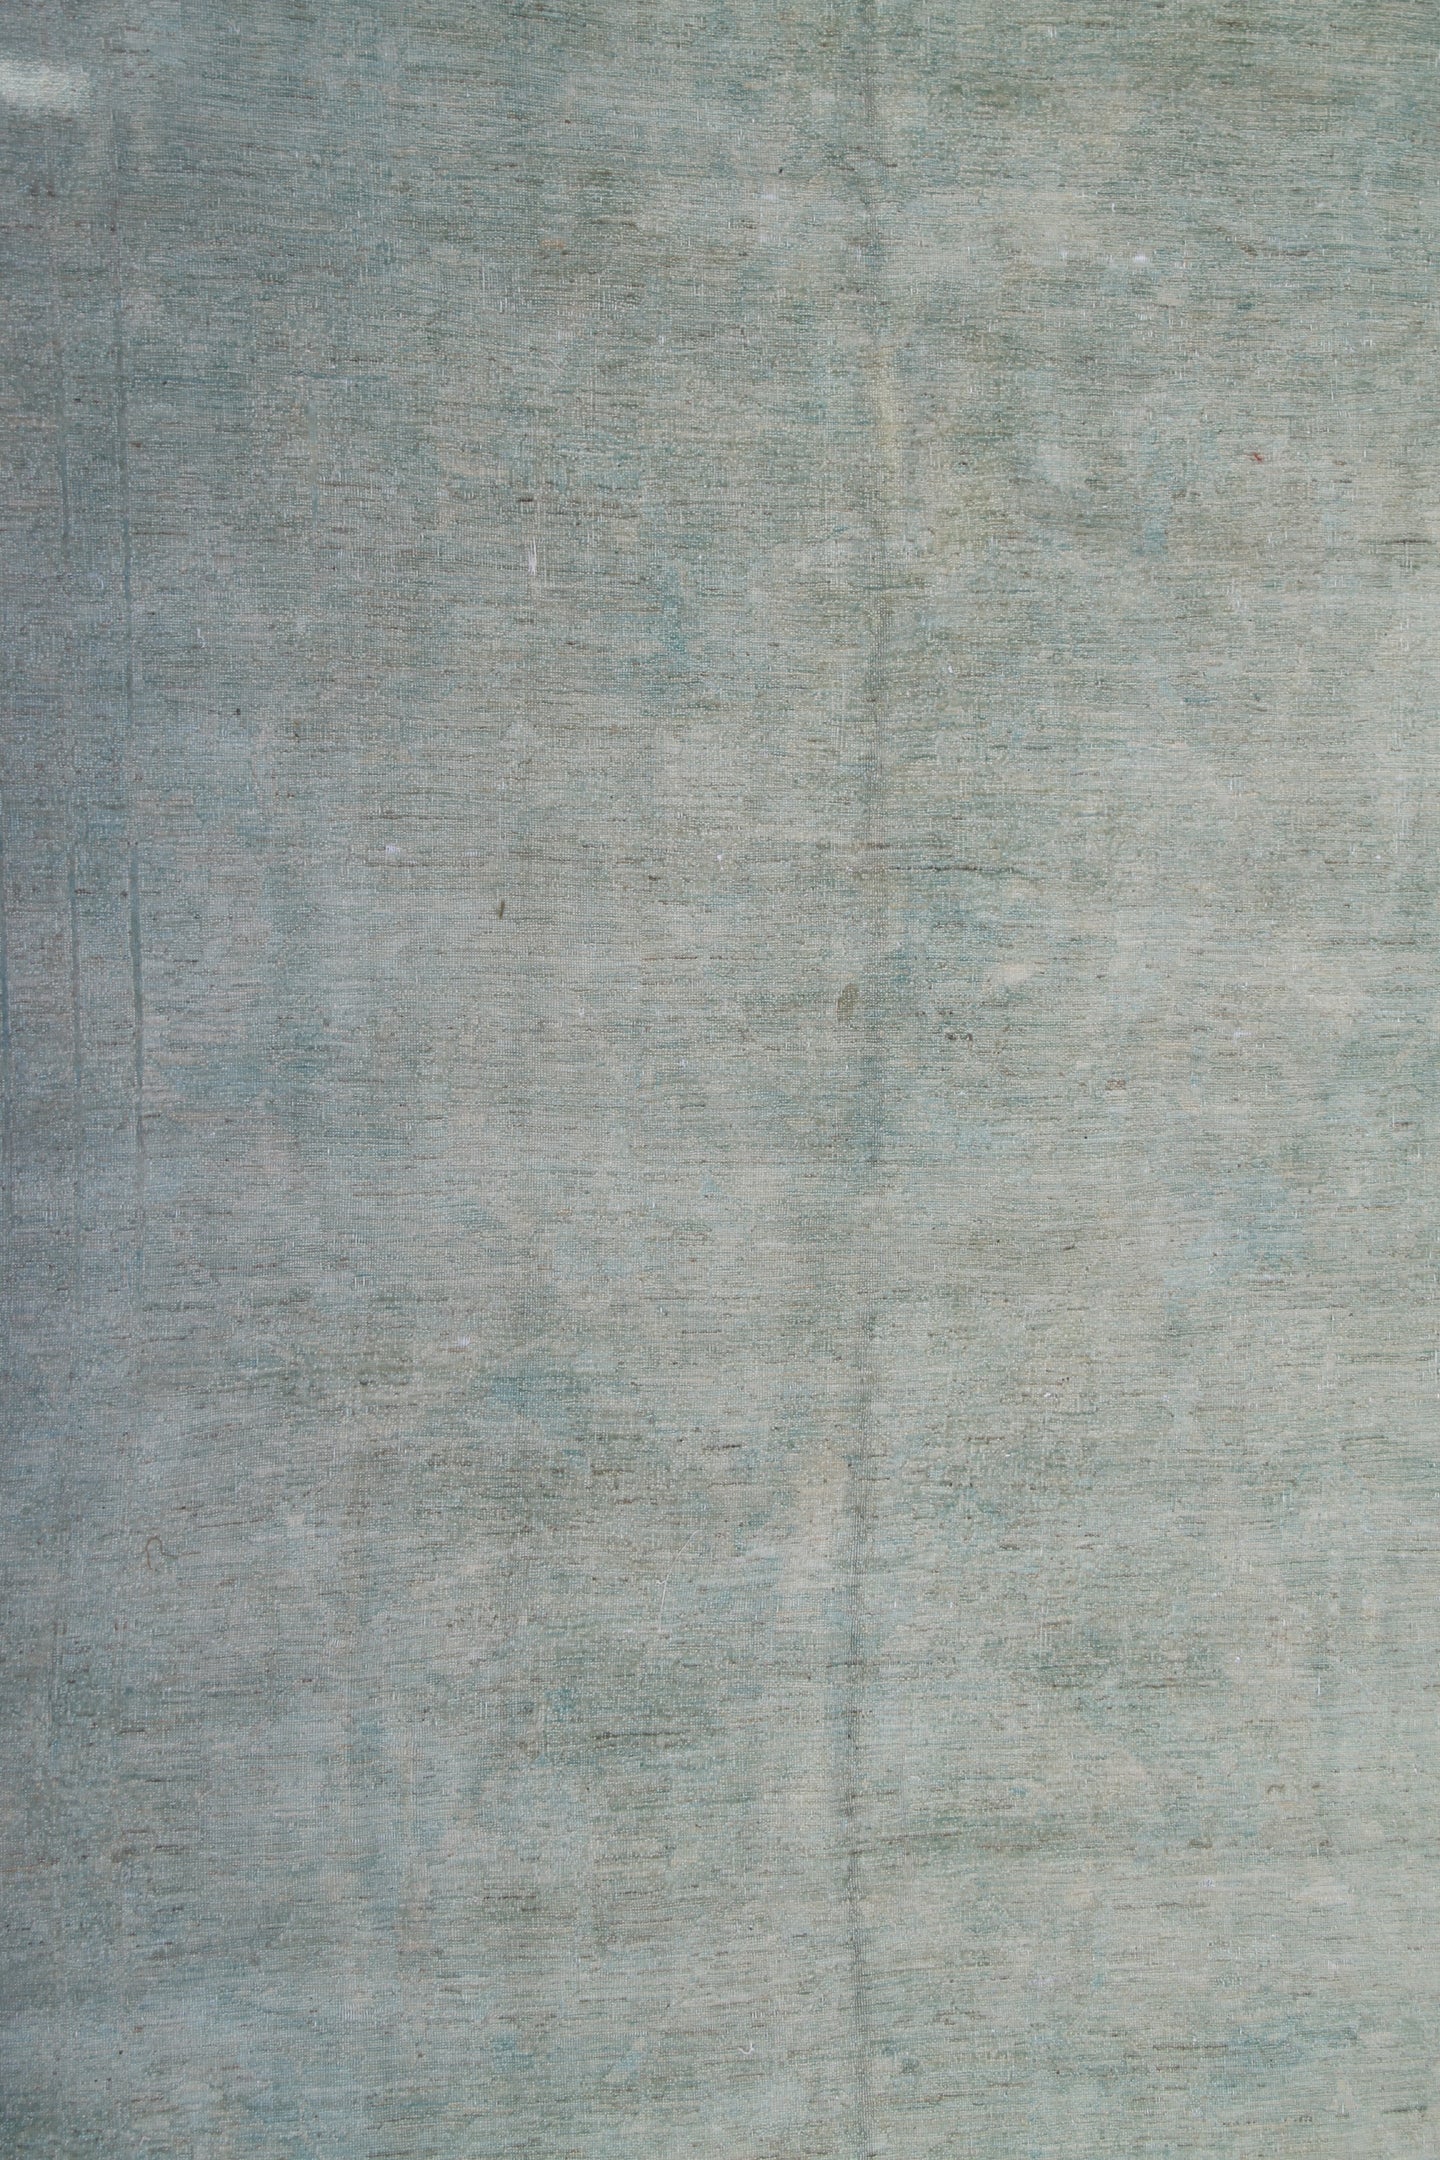 16'x26' Washed Out Blue Green Ariana Overdyed Rug